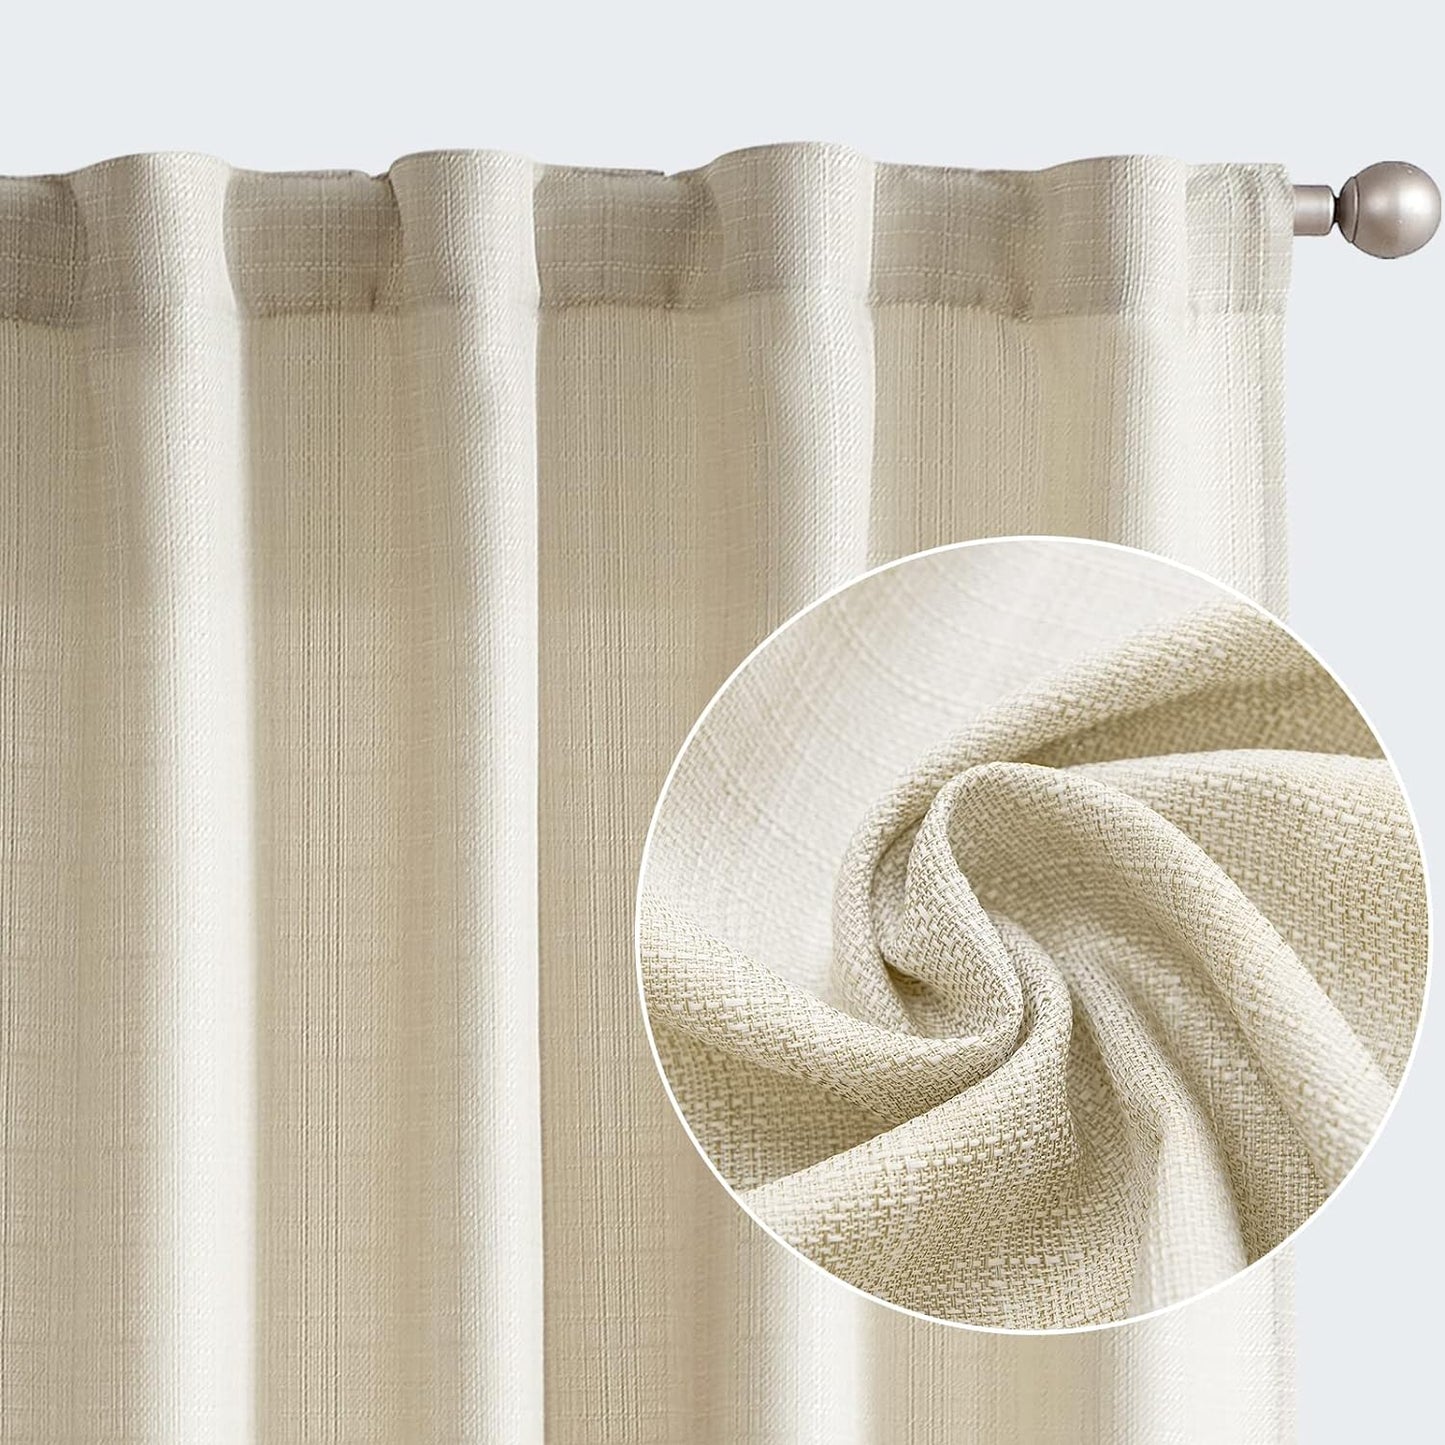 COLLACT White Linen Textured Curtains 84 Inch Length 2 Panels for Living Room Casual Weave Light Filtering Semi Sheer Curtains & Drapes for Bedroom Grommet Top Window Treatments, W38 X L84, White  COLLACT Rod Pocket | Heathered Beige W38 X L96 